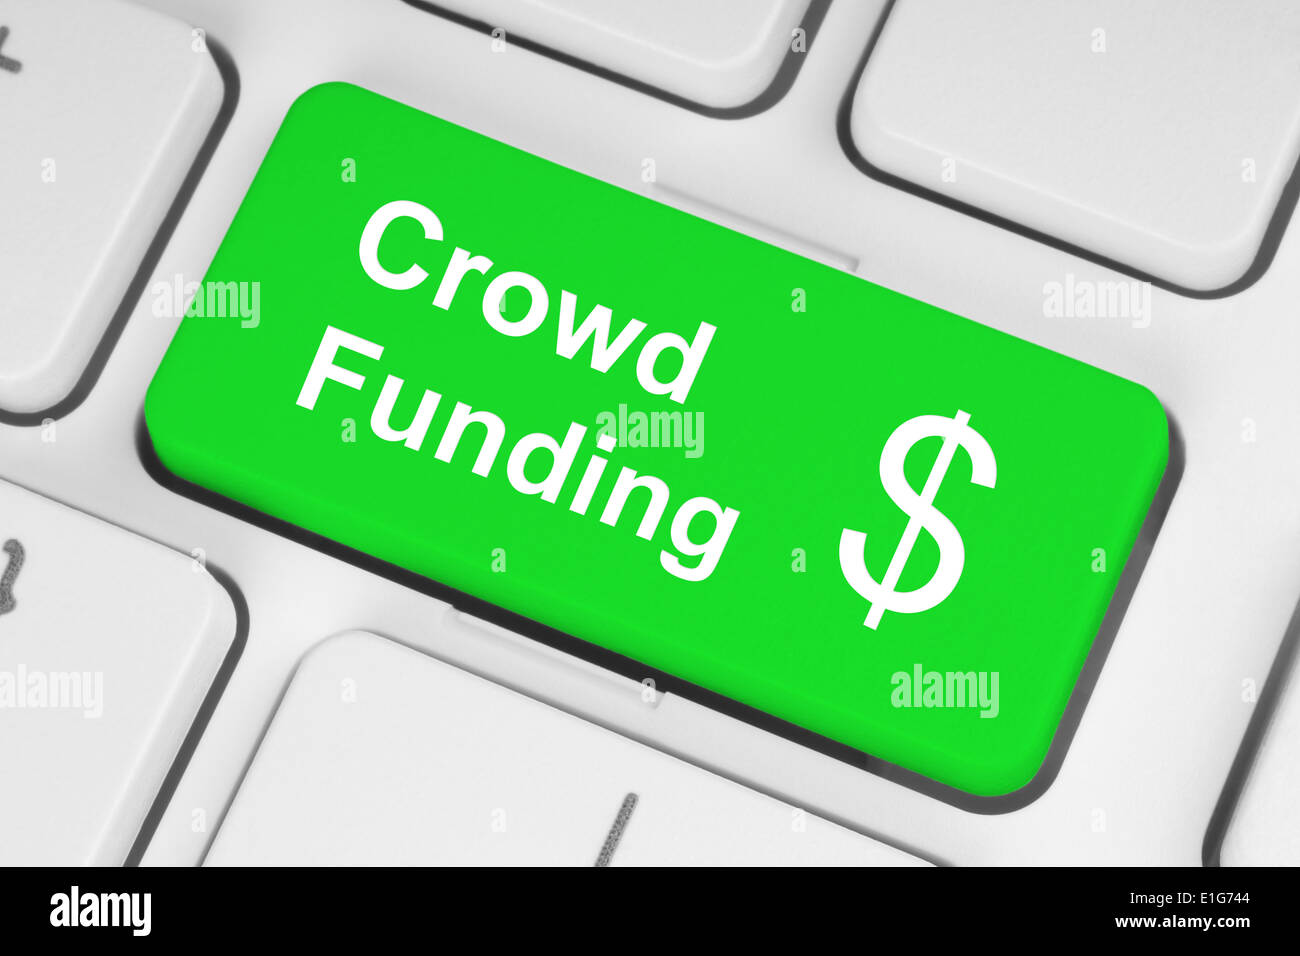 Green crowd funding button on keyboard Stock Photo